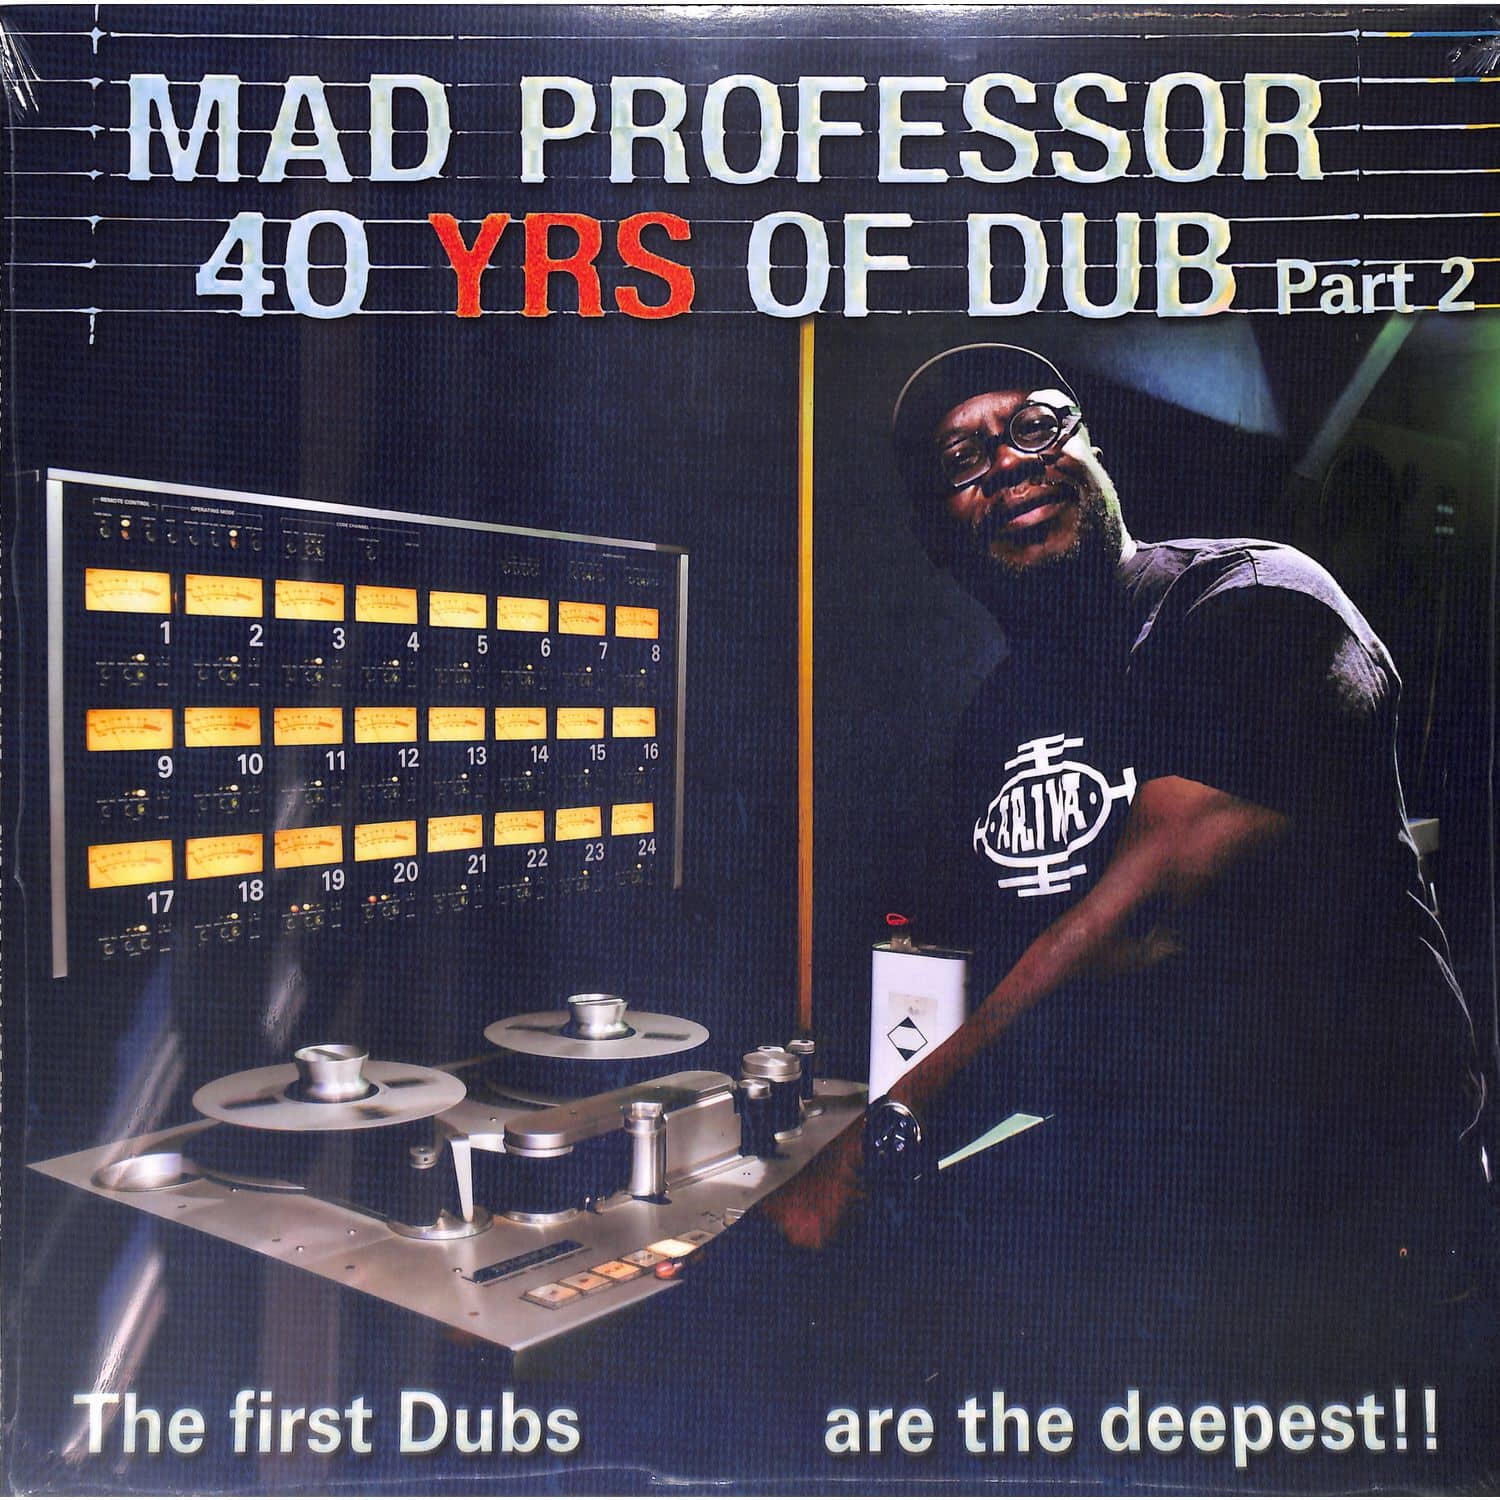 Mad Professor - THE FIRST DUBS ARE THE DEEPEST - 40 YEARS OF DUB PART 2 